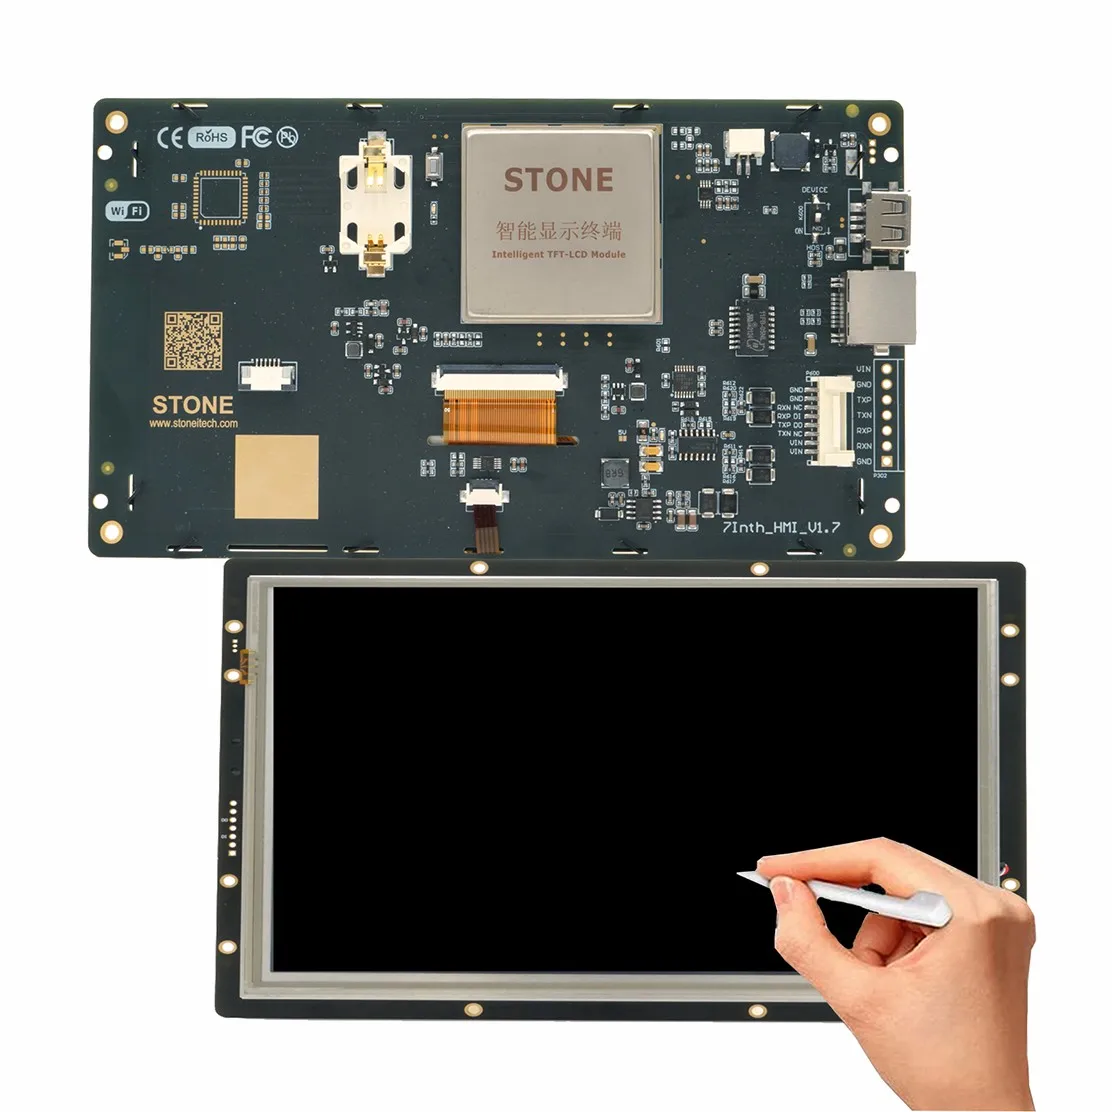 7.0 Industry Smart HMI Series Screen 256MB of flash memory for HMI projects, 1G Hz Cortex A8 CPU HMI projects